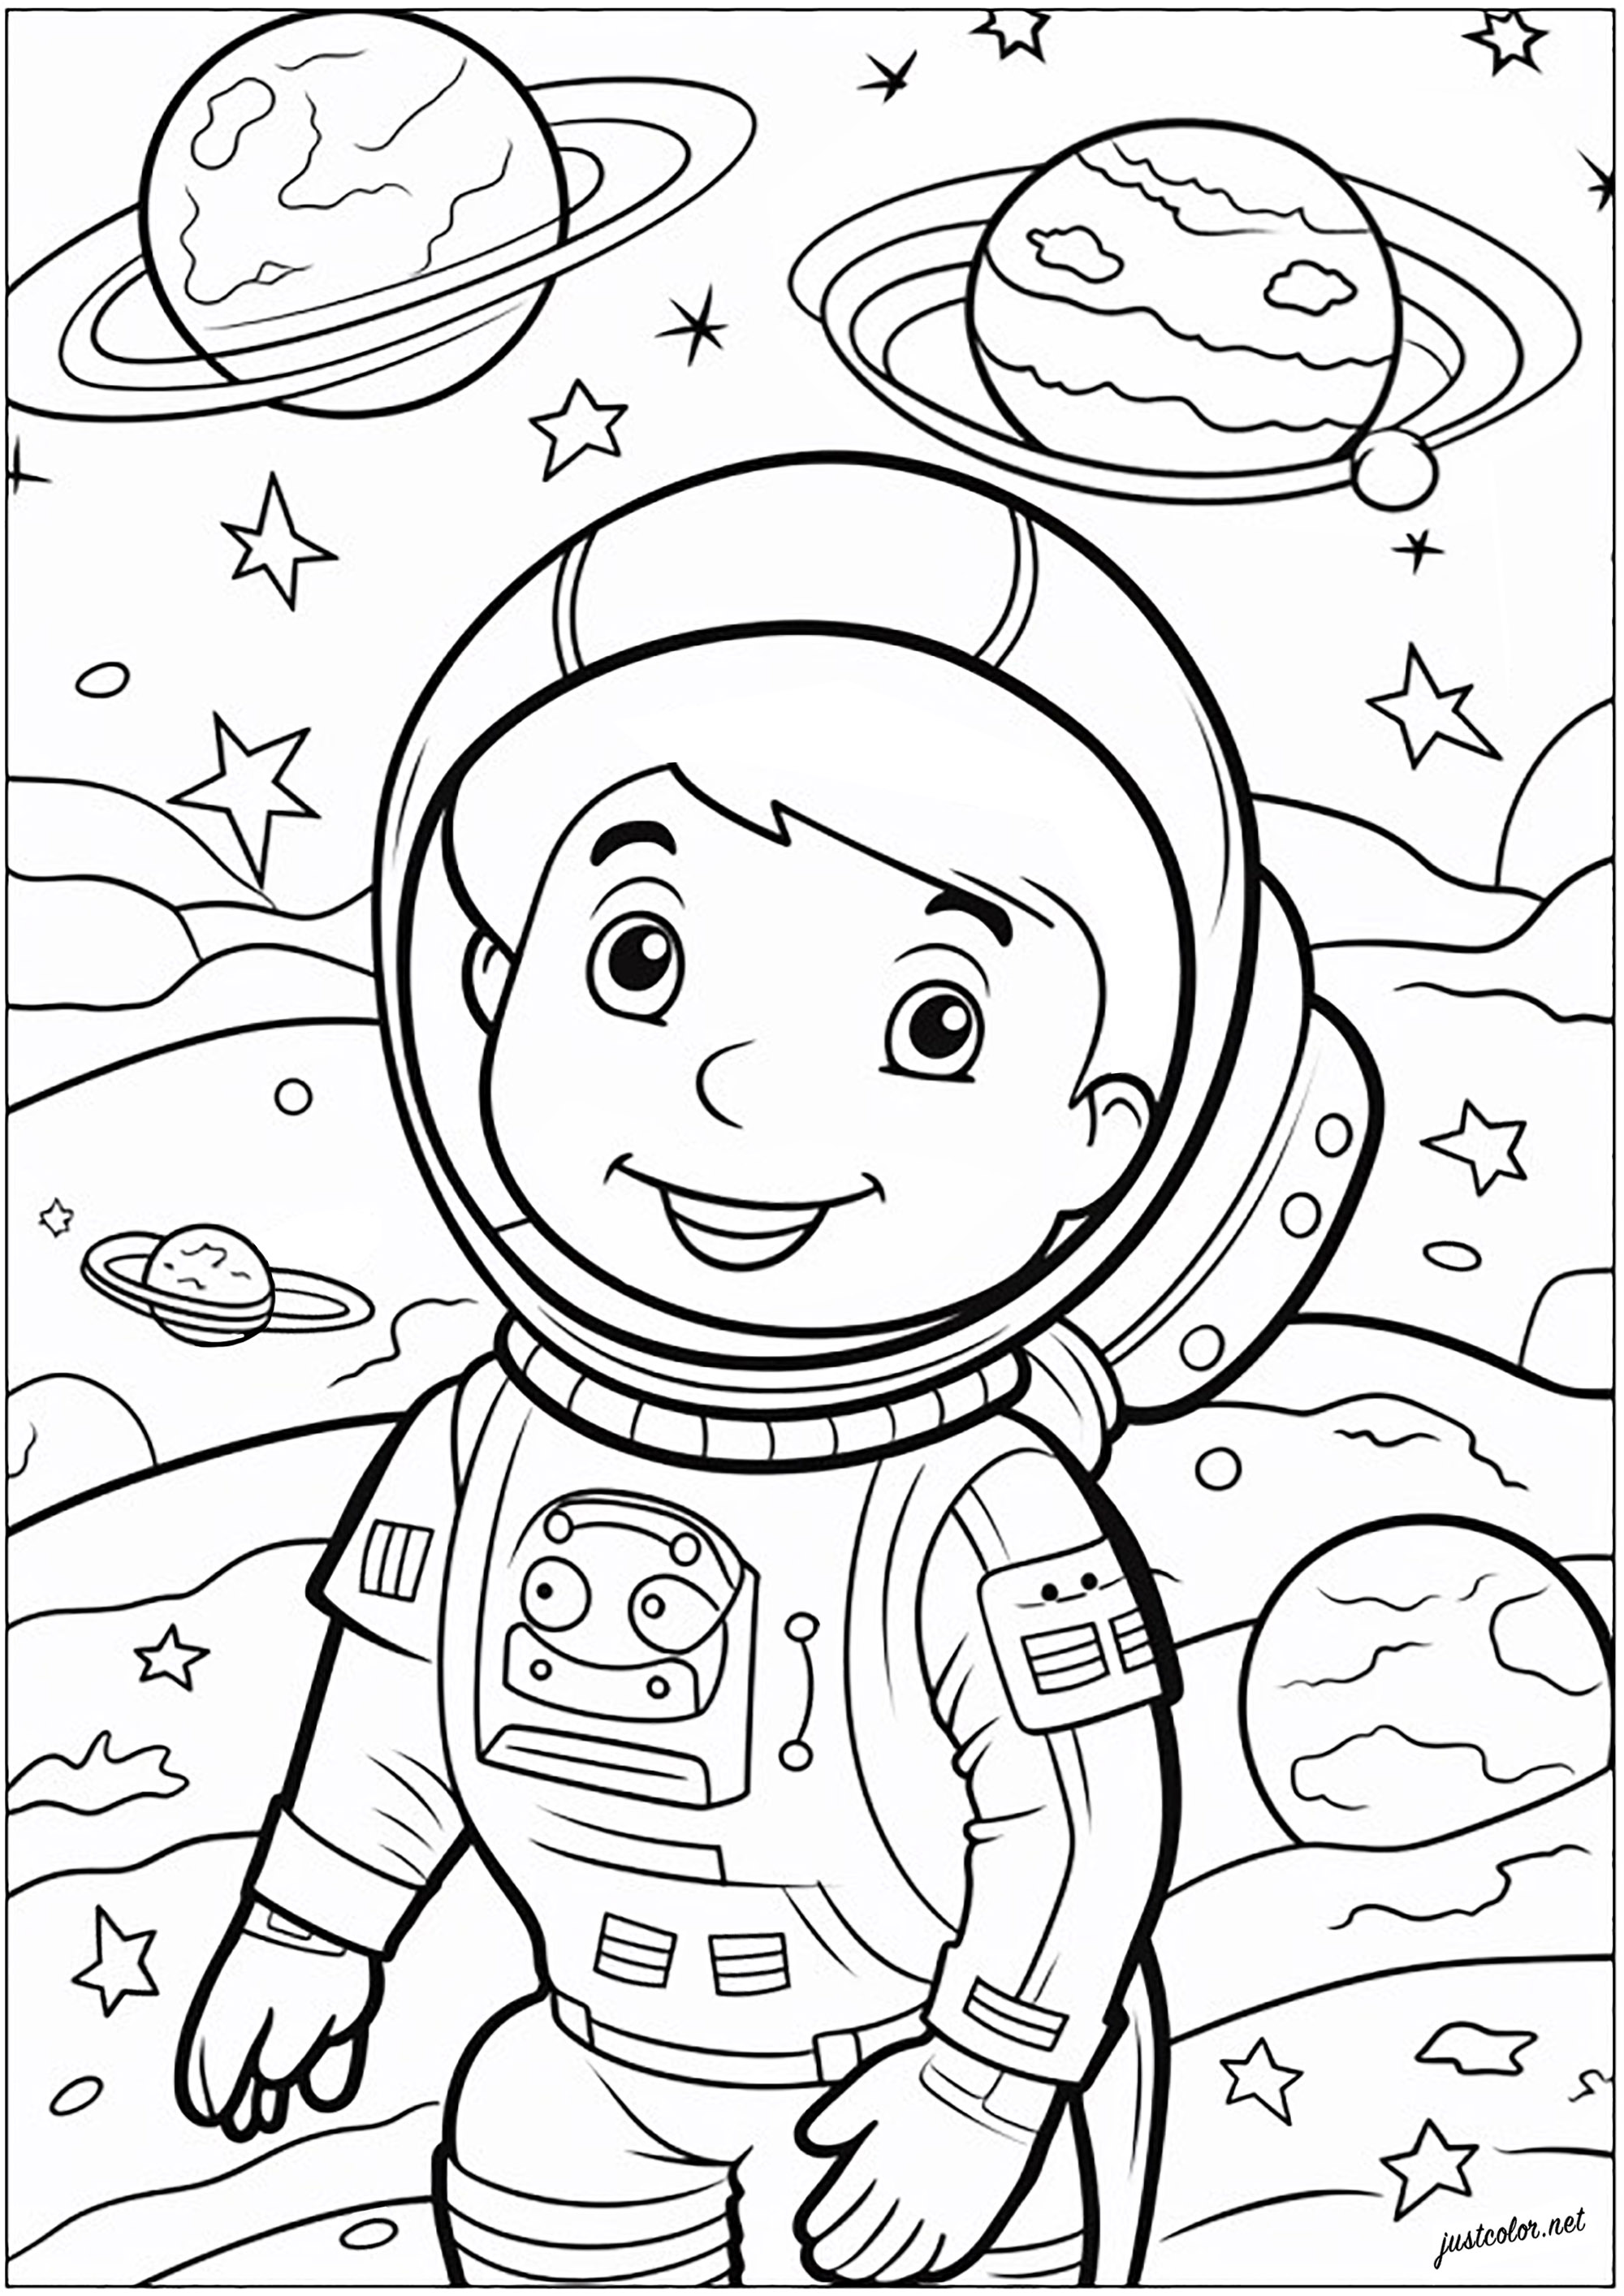 Coloring a little astronaut. Young astronaut depicted in space, floating among stars and planets